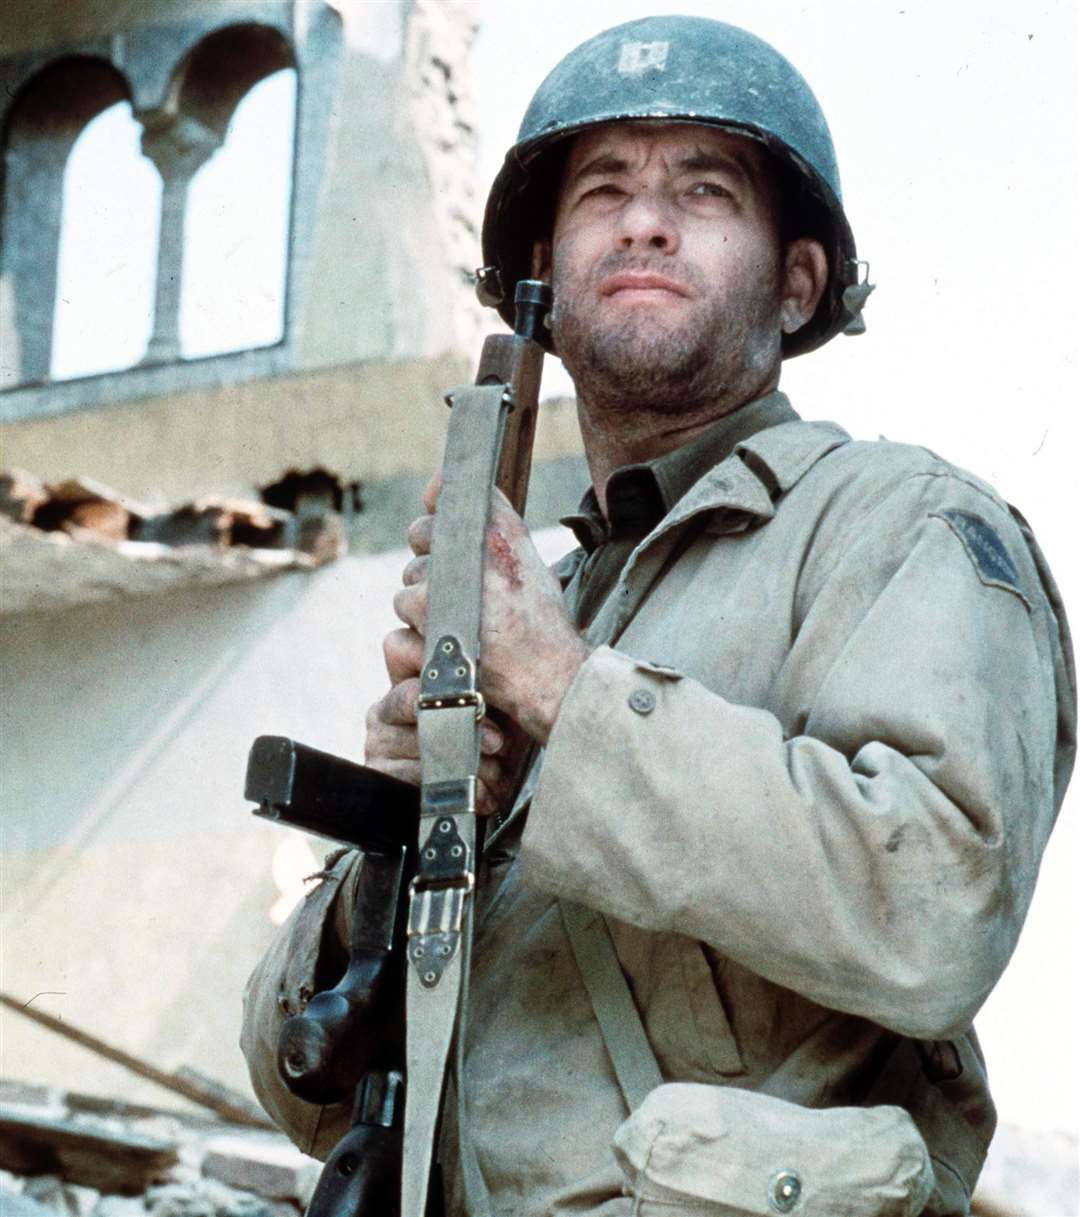 Tom Hanks (who starred in Saving Private Ryan) will be starring in another second World War movie in 2020